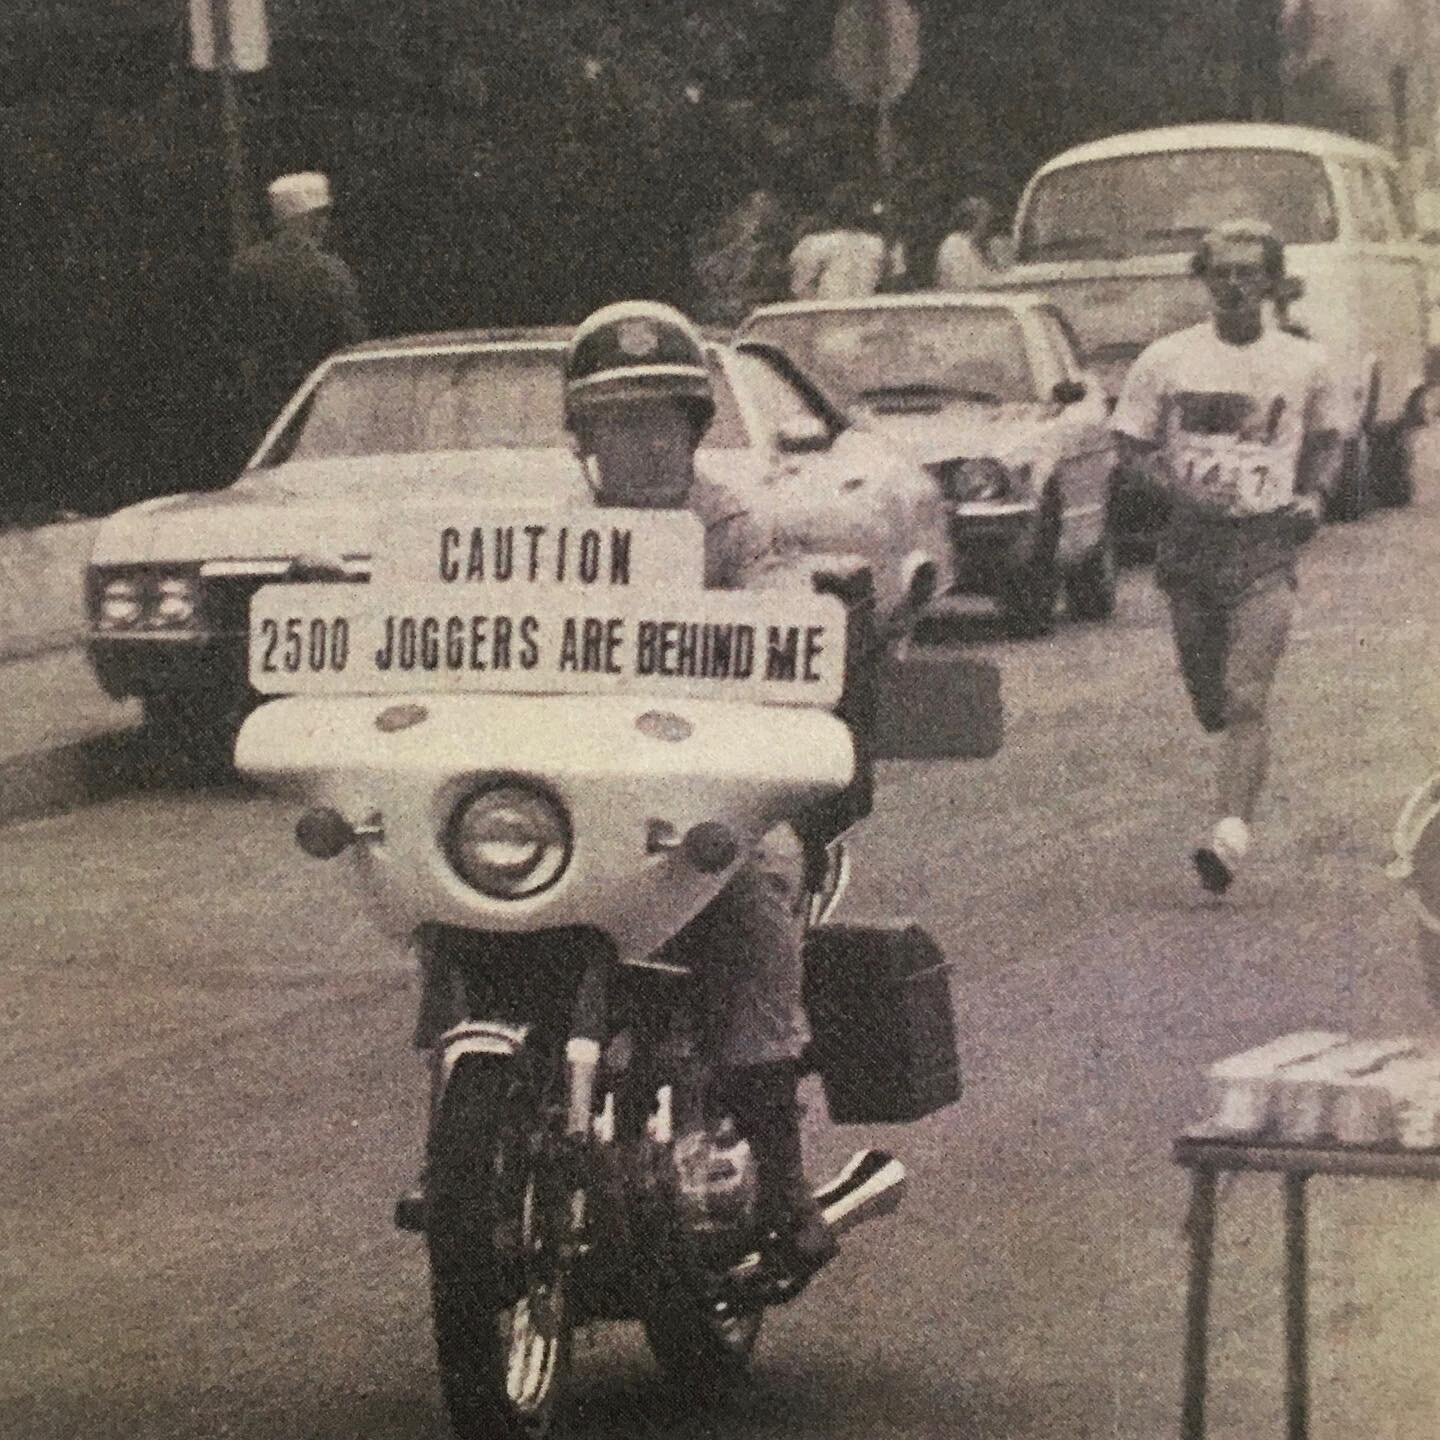 Through the years of the MB10k! This gem is from our first year in 1978. Be a part of our history and Run Your Own Race this year from wherever you are! We&rsquo;ve got people participating from all over the U.S.A.: California, Texas, Massachusetts, 